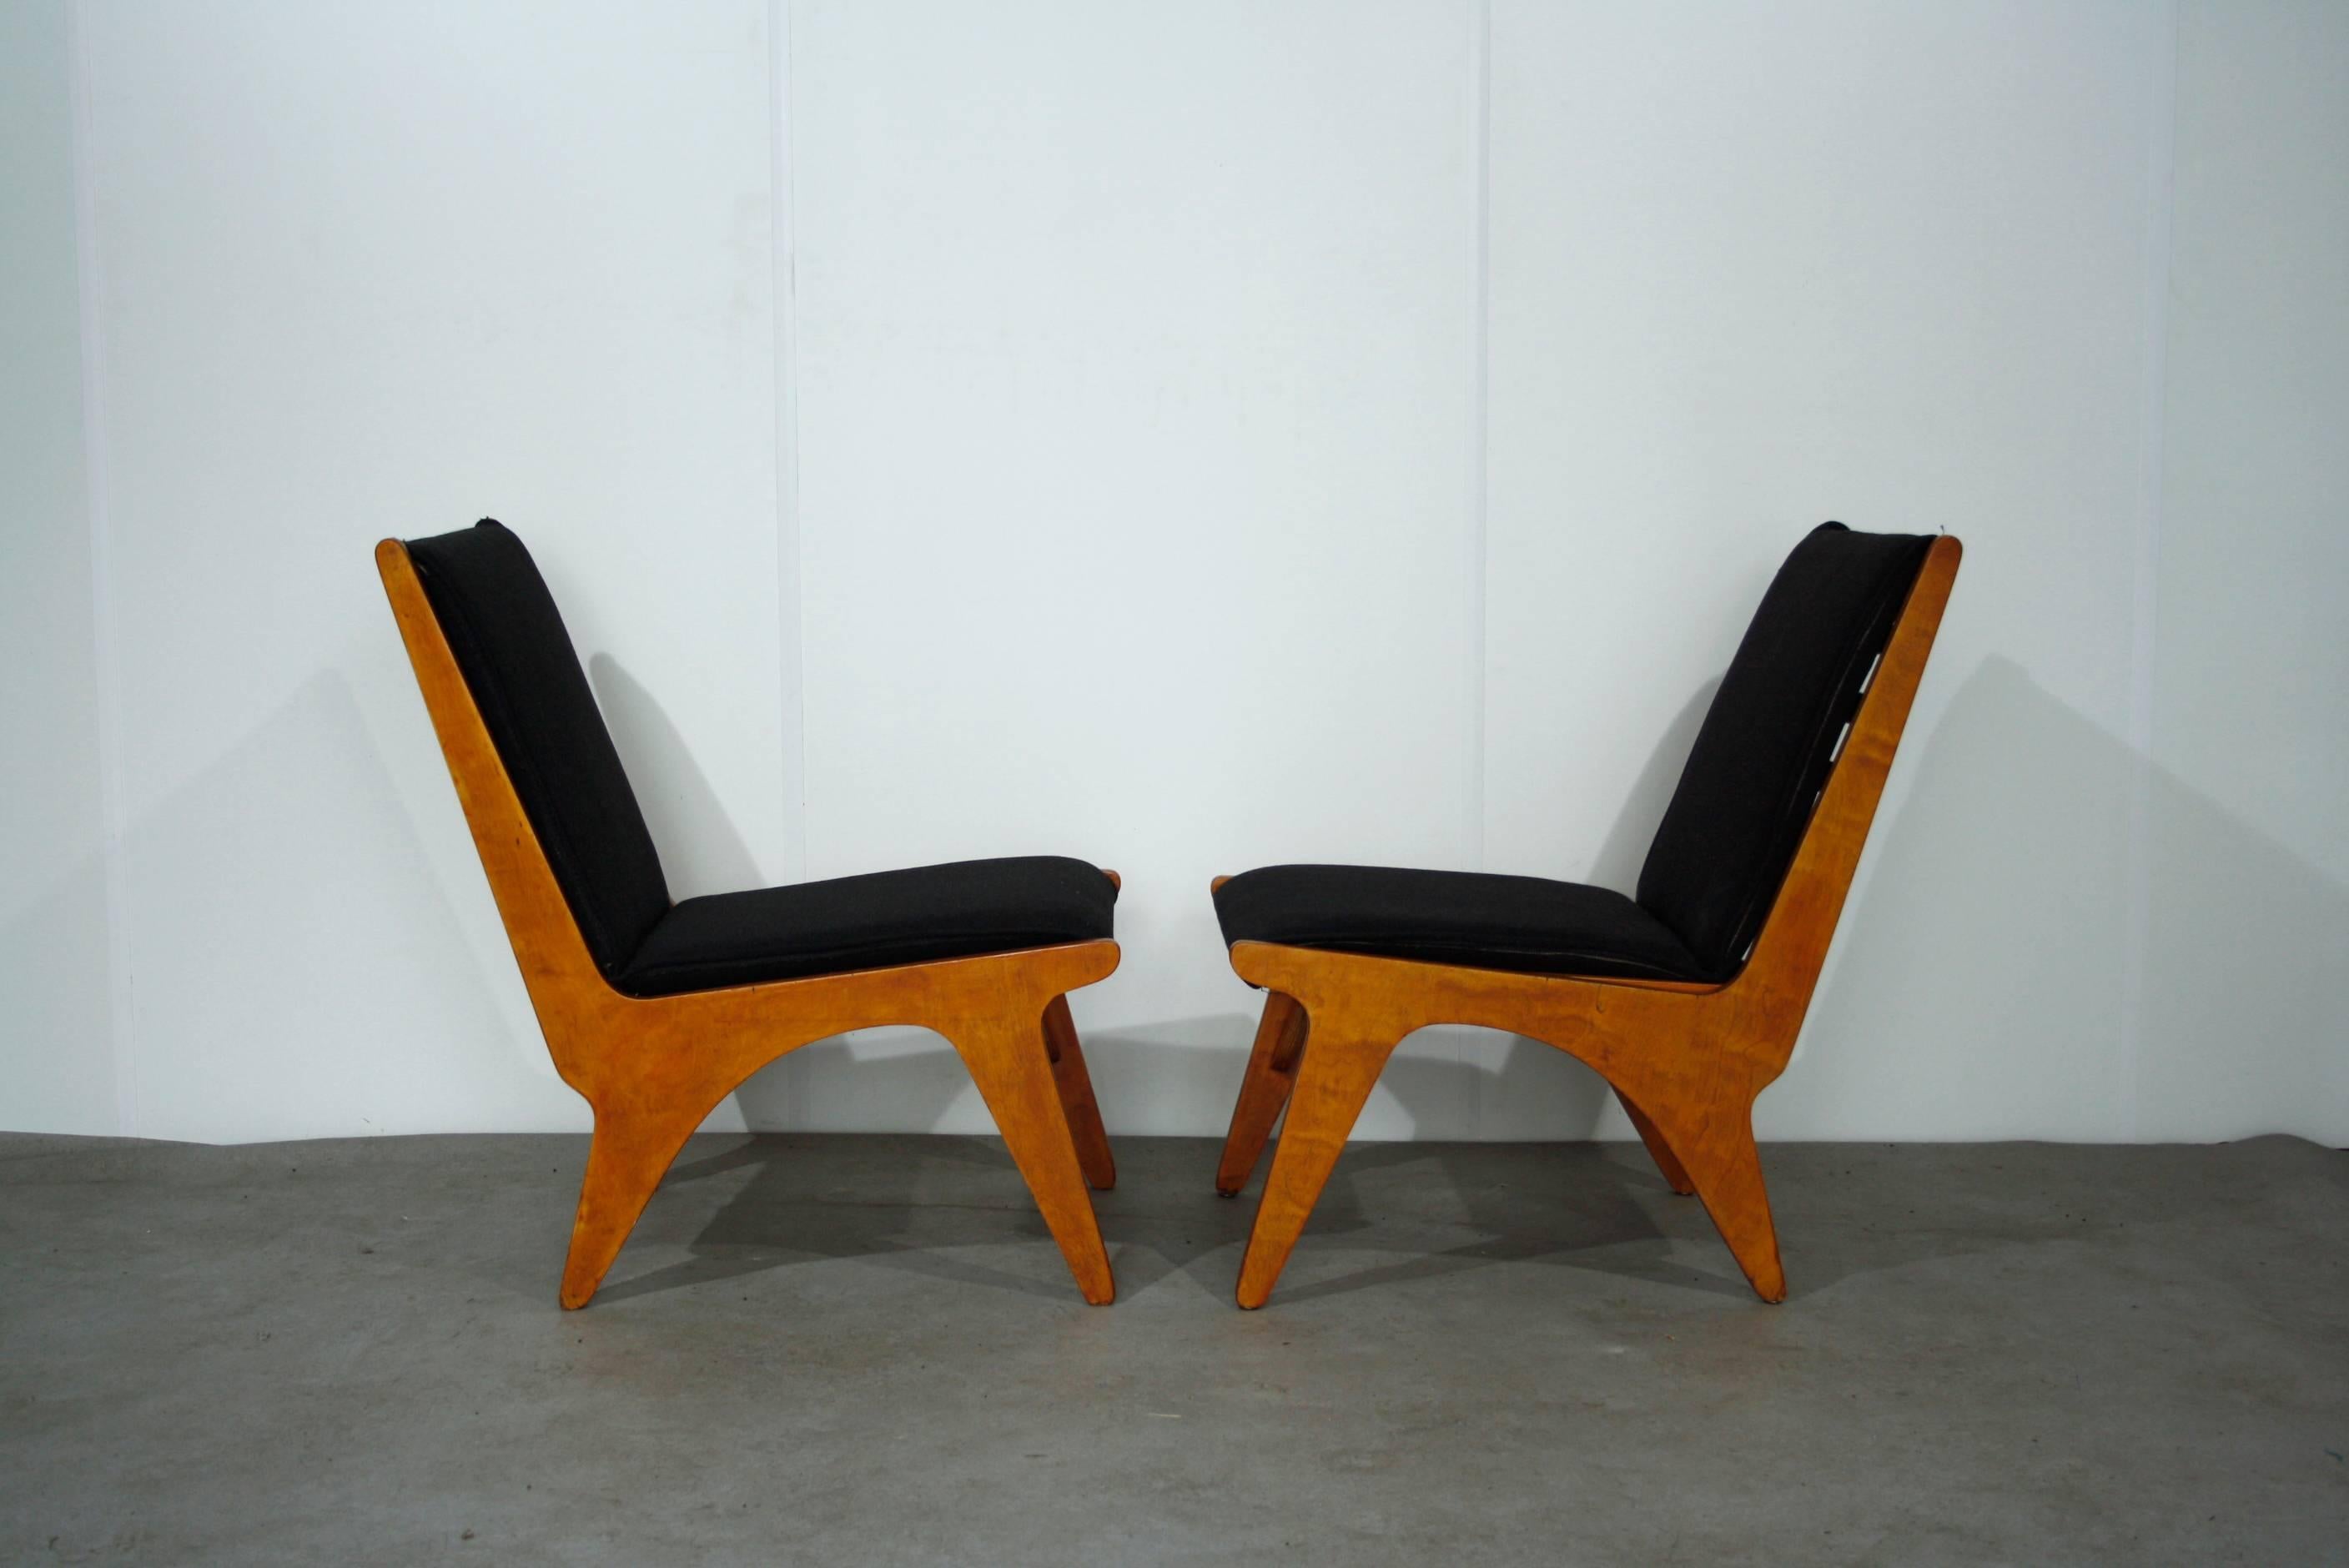 Early Dutch midcentury 't Spectrum lounge chairs by W. Van Gelderen.

In his early years, van Gelderen (1903-1992) was one of the designers of Dutch furniture company “Fabriek D3”, where he worked with architects and designers like Cor Alons, Paul